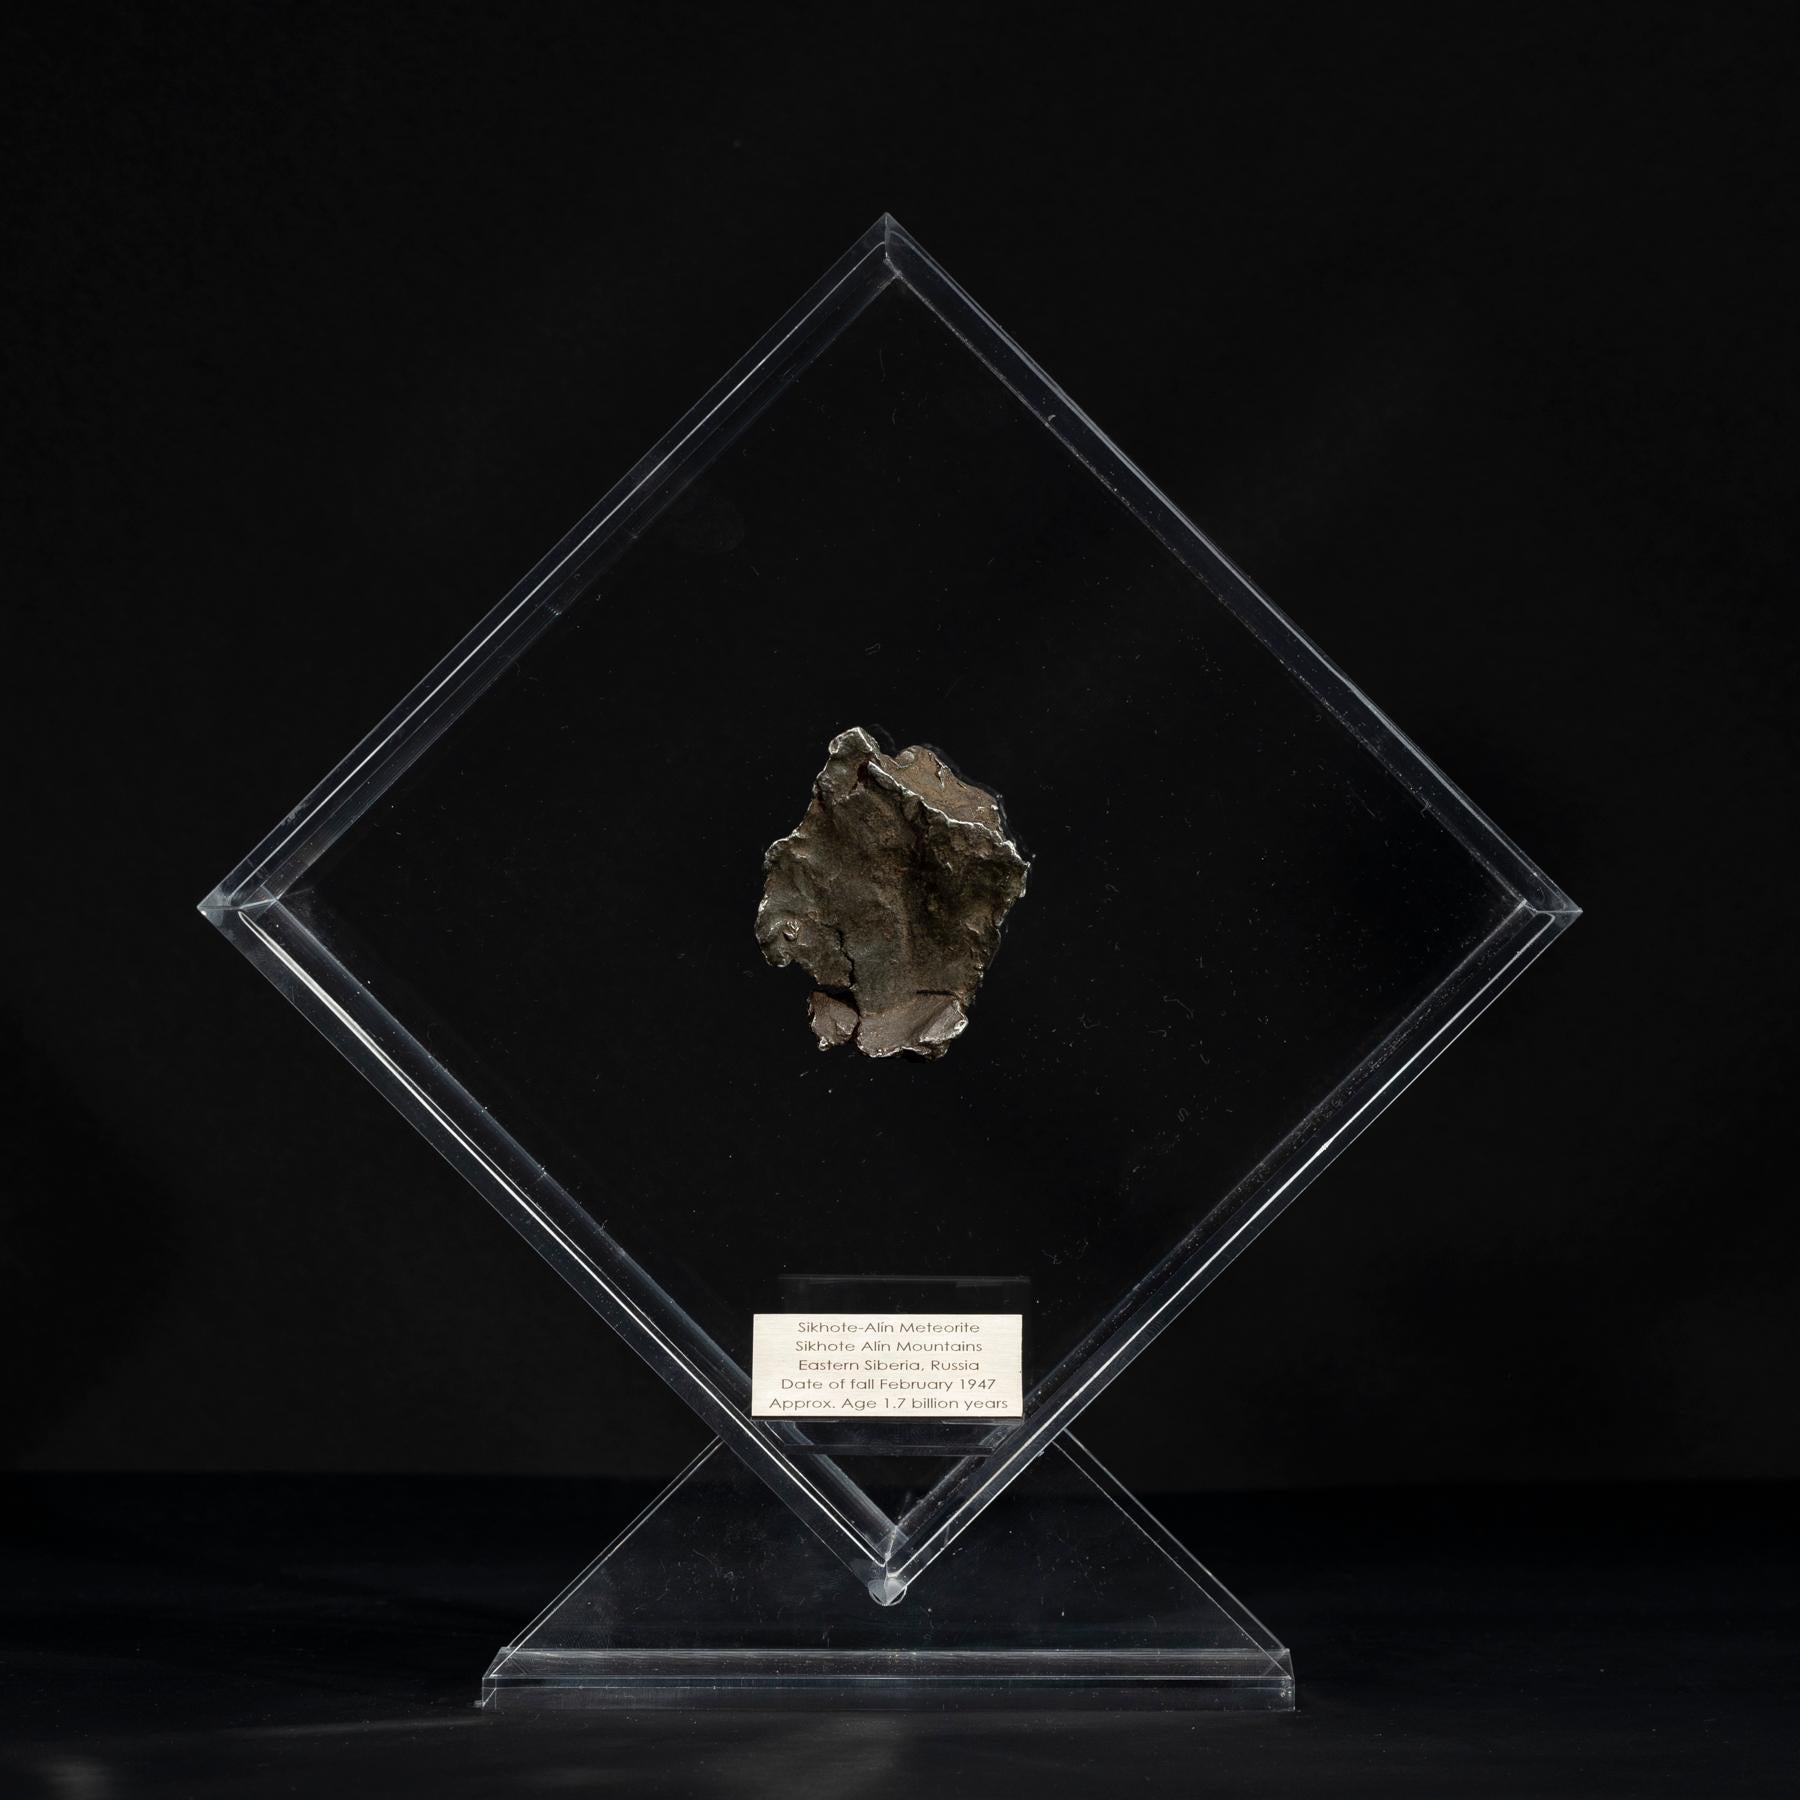 Original design in acrylic display with a magnet making the Meteorite look as it´s floating the same way it did in outer space for years before its final visit to Earth. 

Sikhote Alin Meteorite
This iron Meteorite fell in Eastern Siberia, Russia on